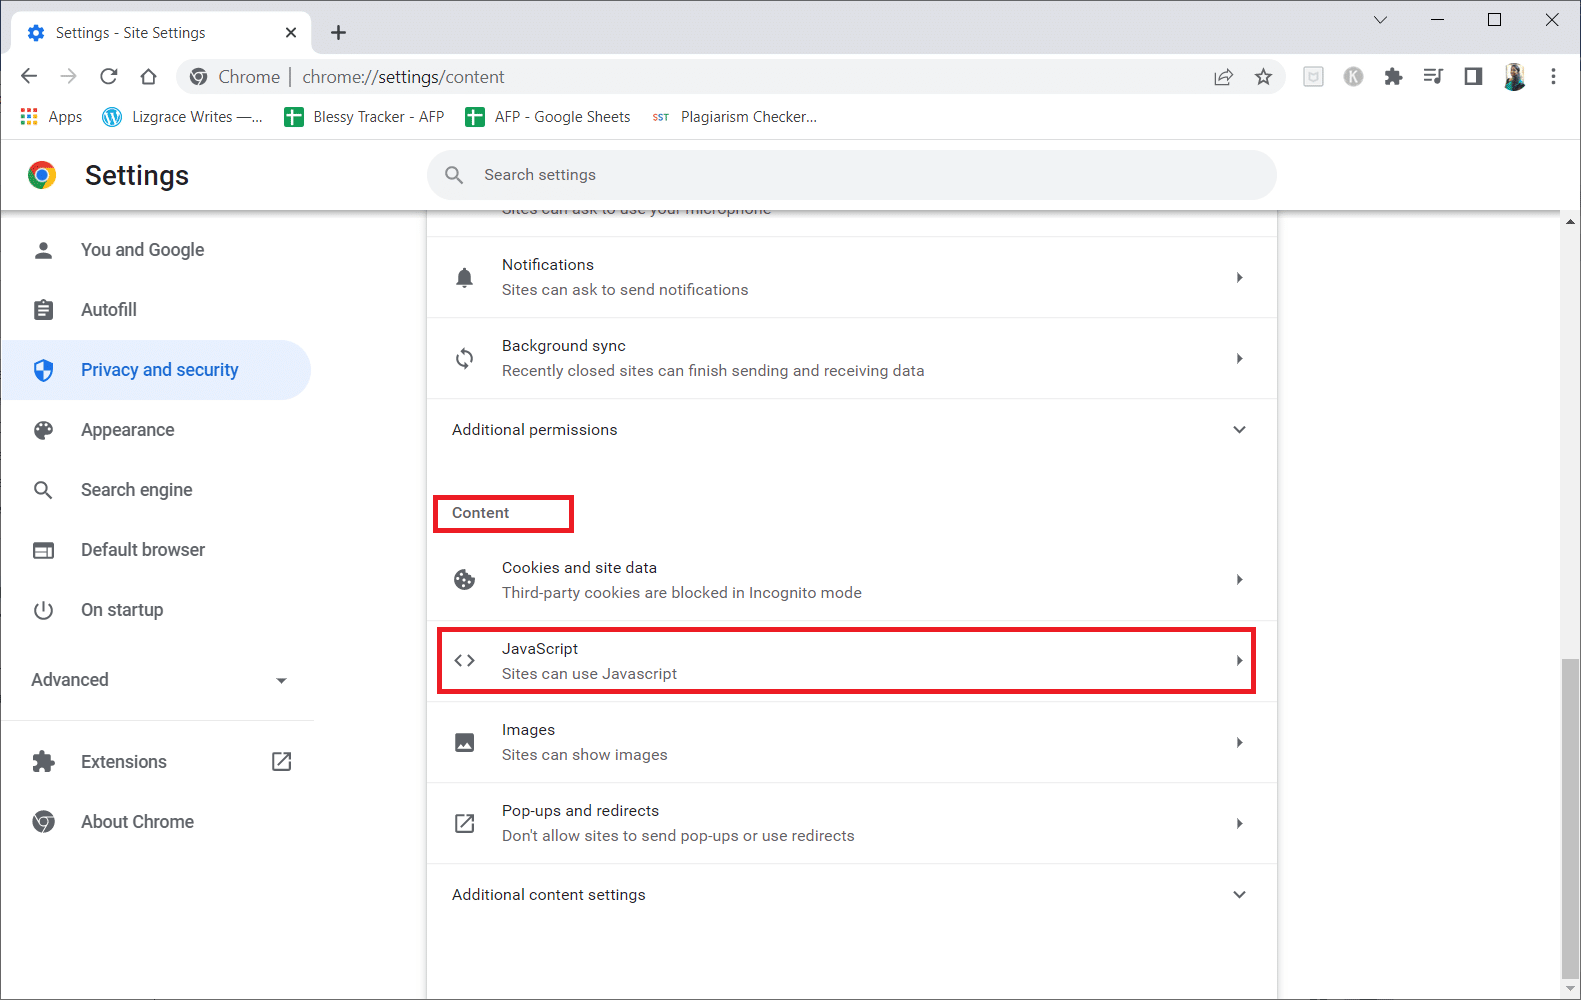 Scroll down and click on JavaScript under the Content section